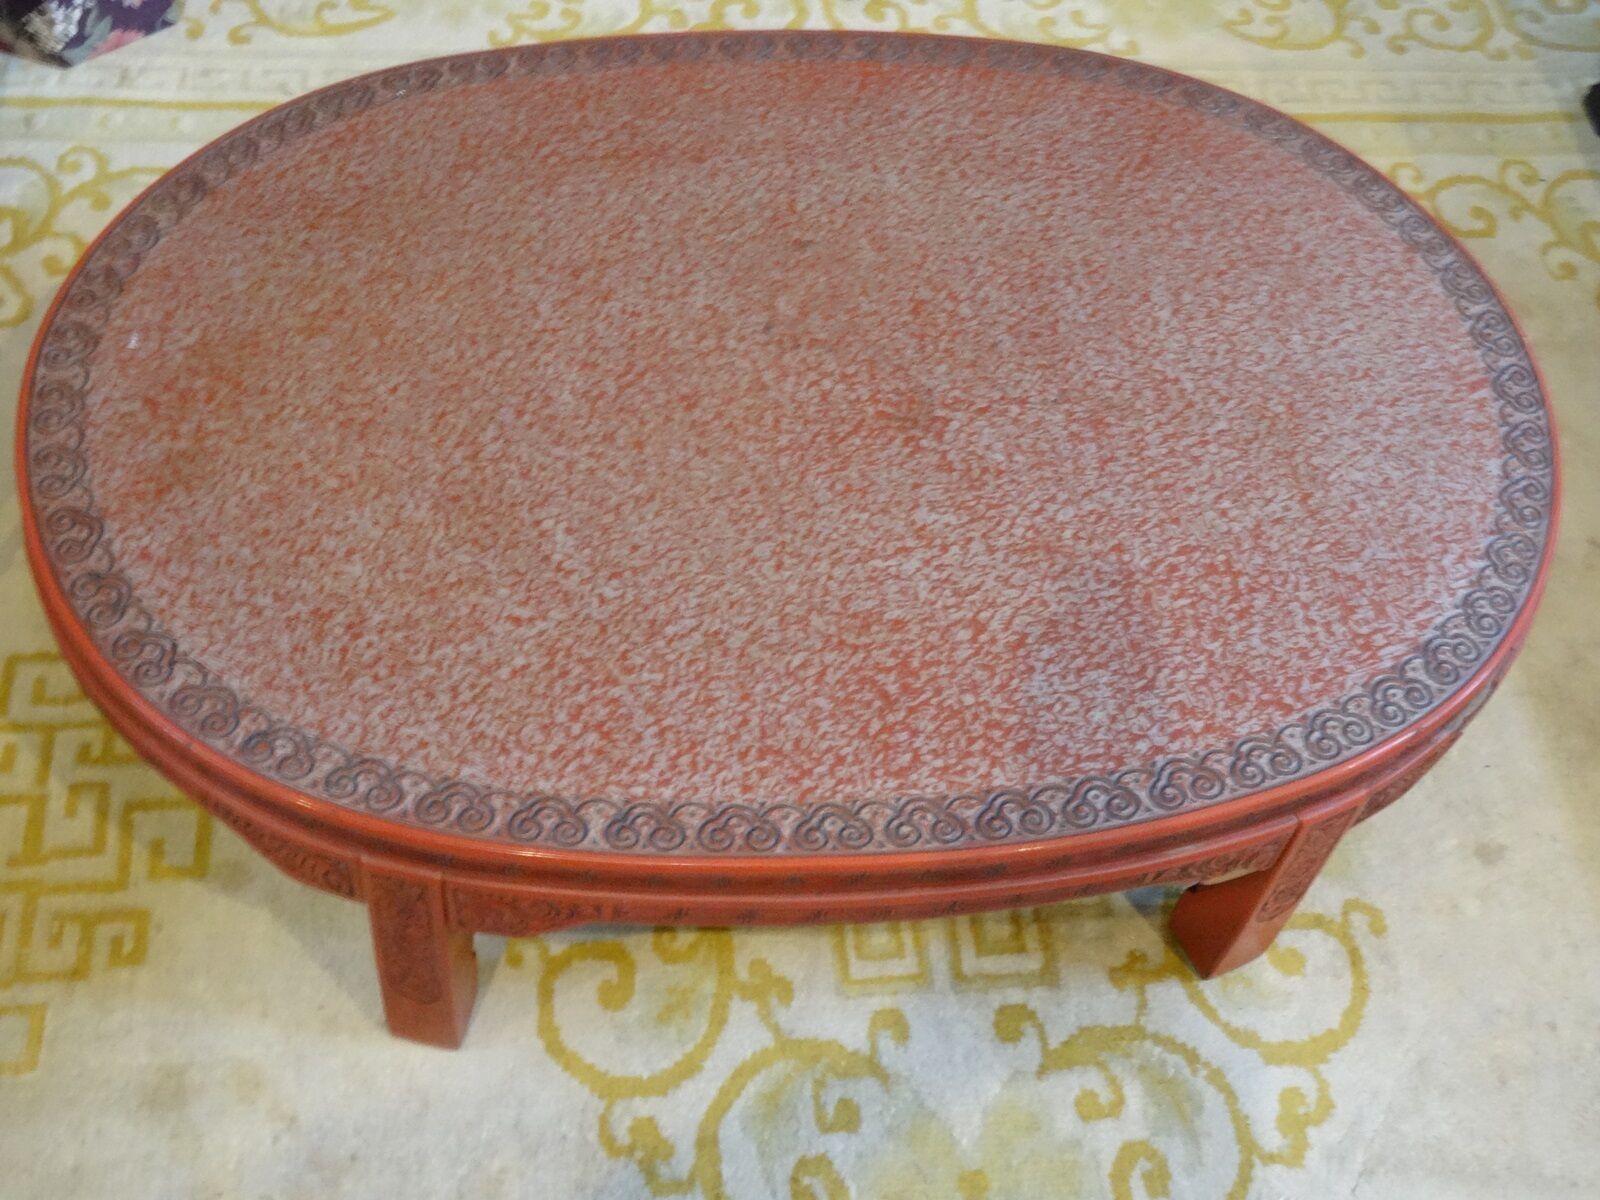 ANTIQUE LATE 19 c. CHINESE LACQUER INTRICATE CARVED CINNABAR COFFEE TABLE Без бренда - фотография #2